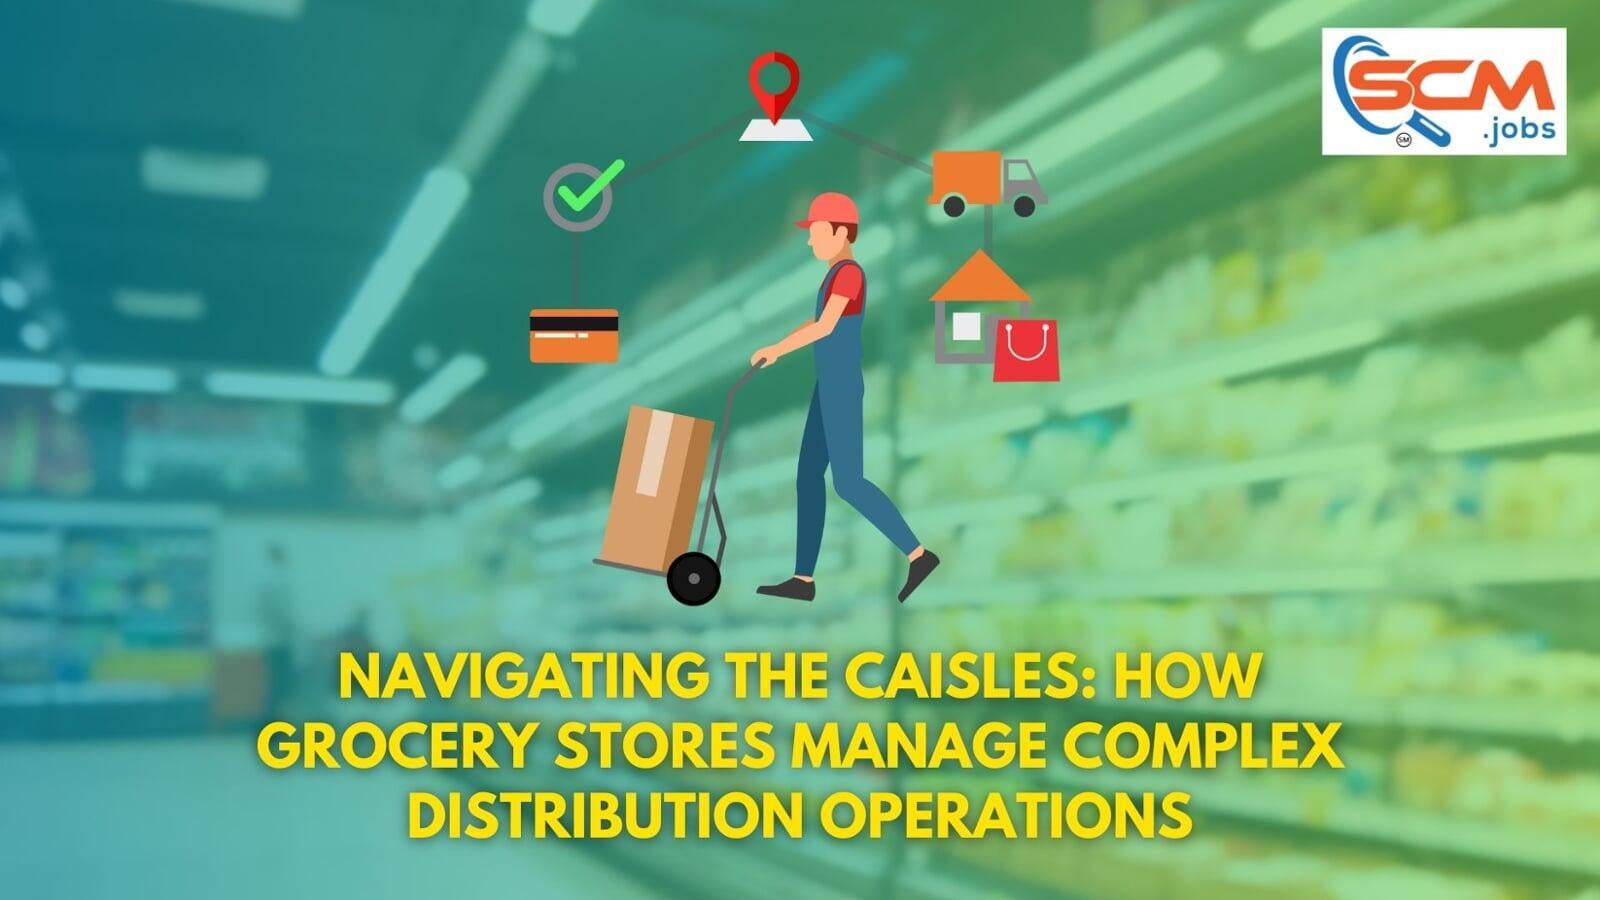 Navigating the Caisles: How Grocery Stores Manage Complex Distribution Operations